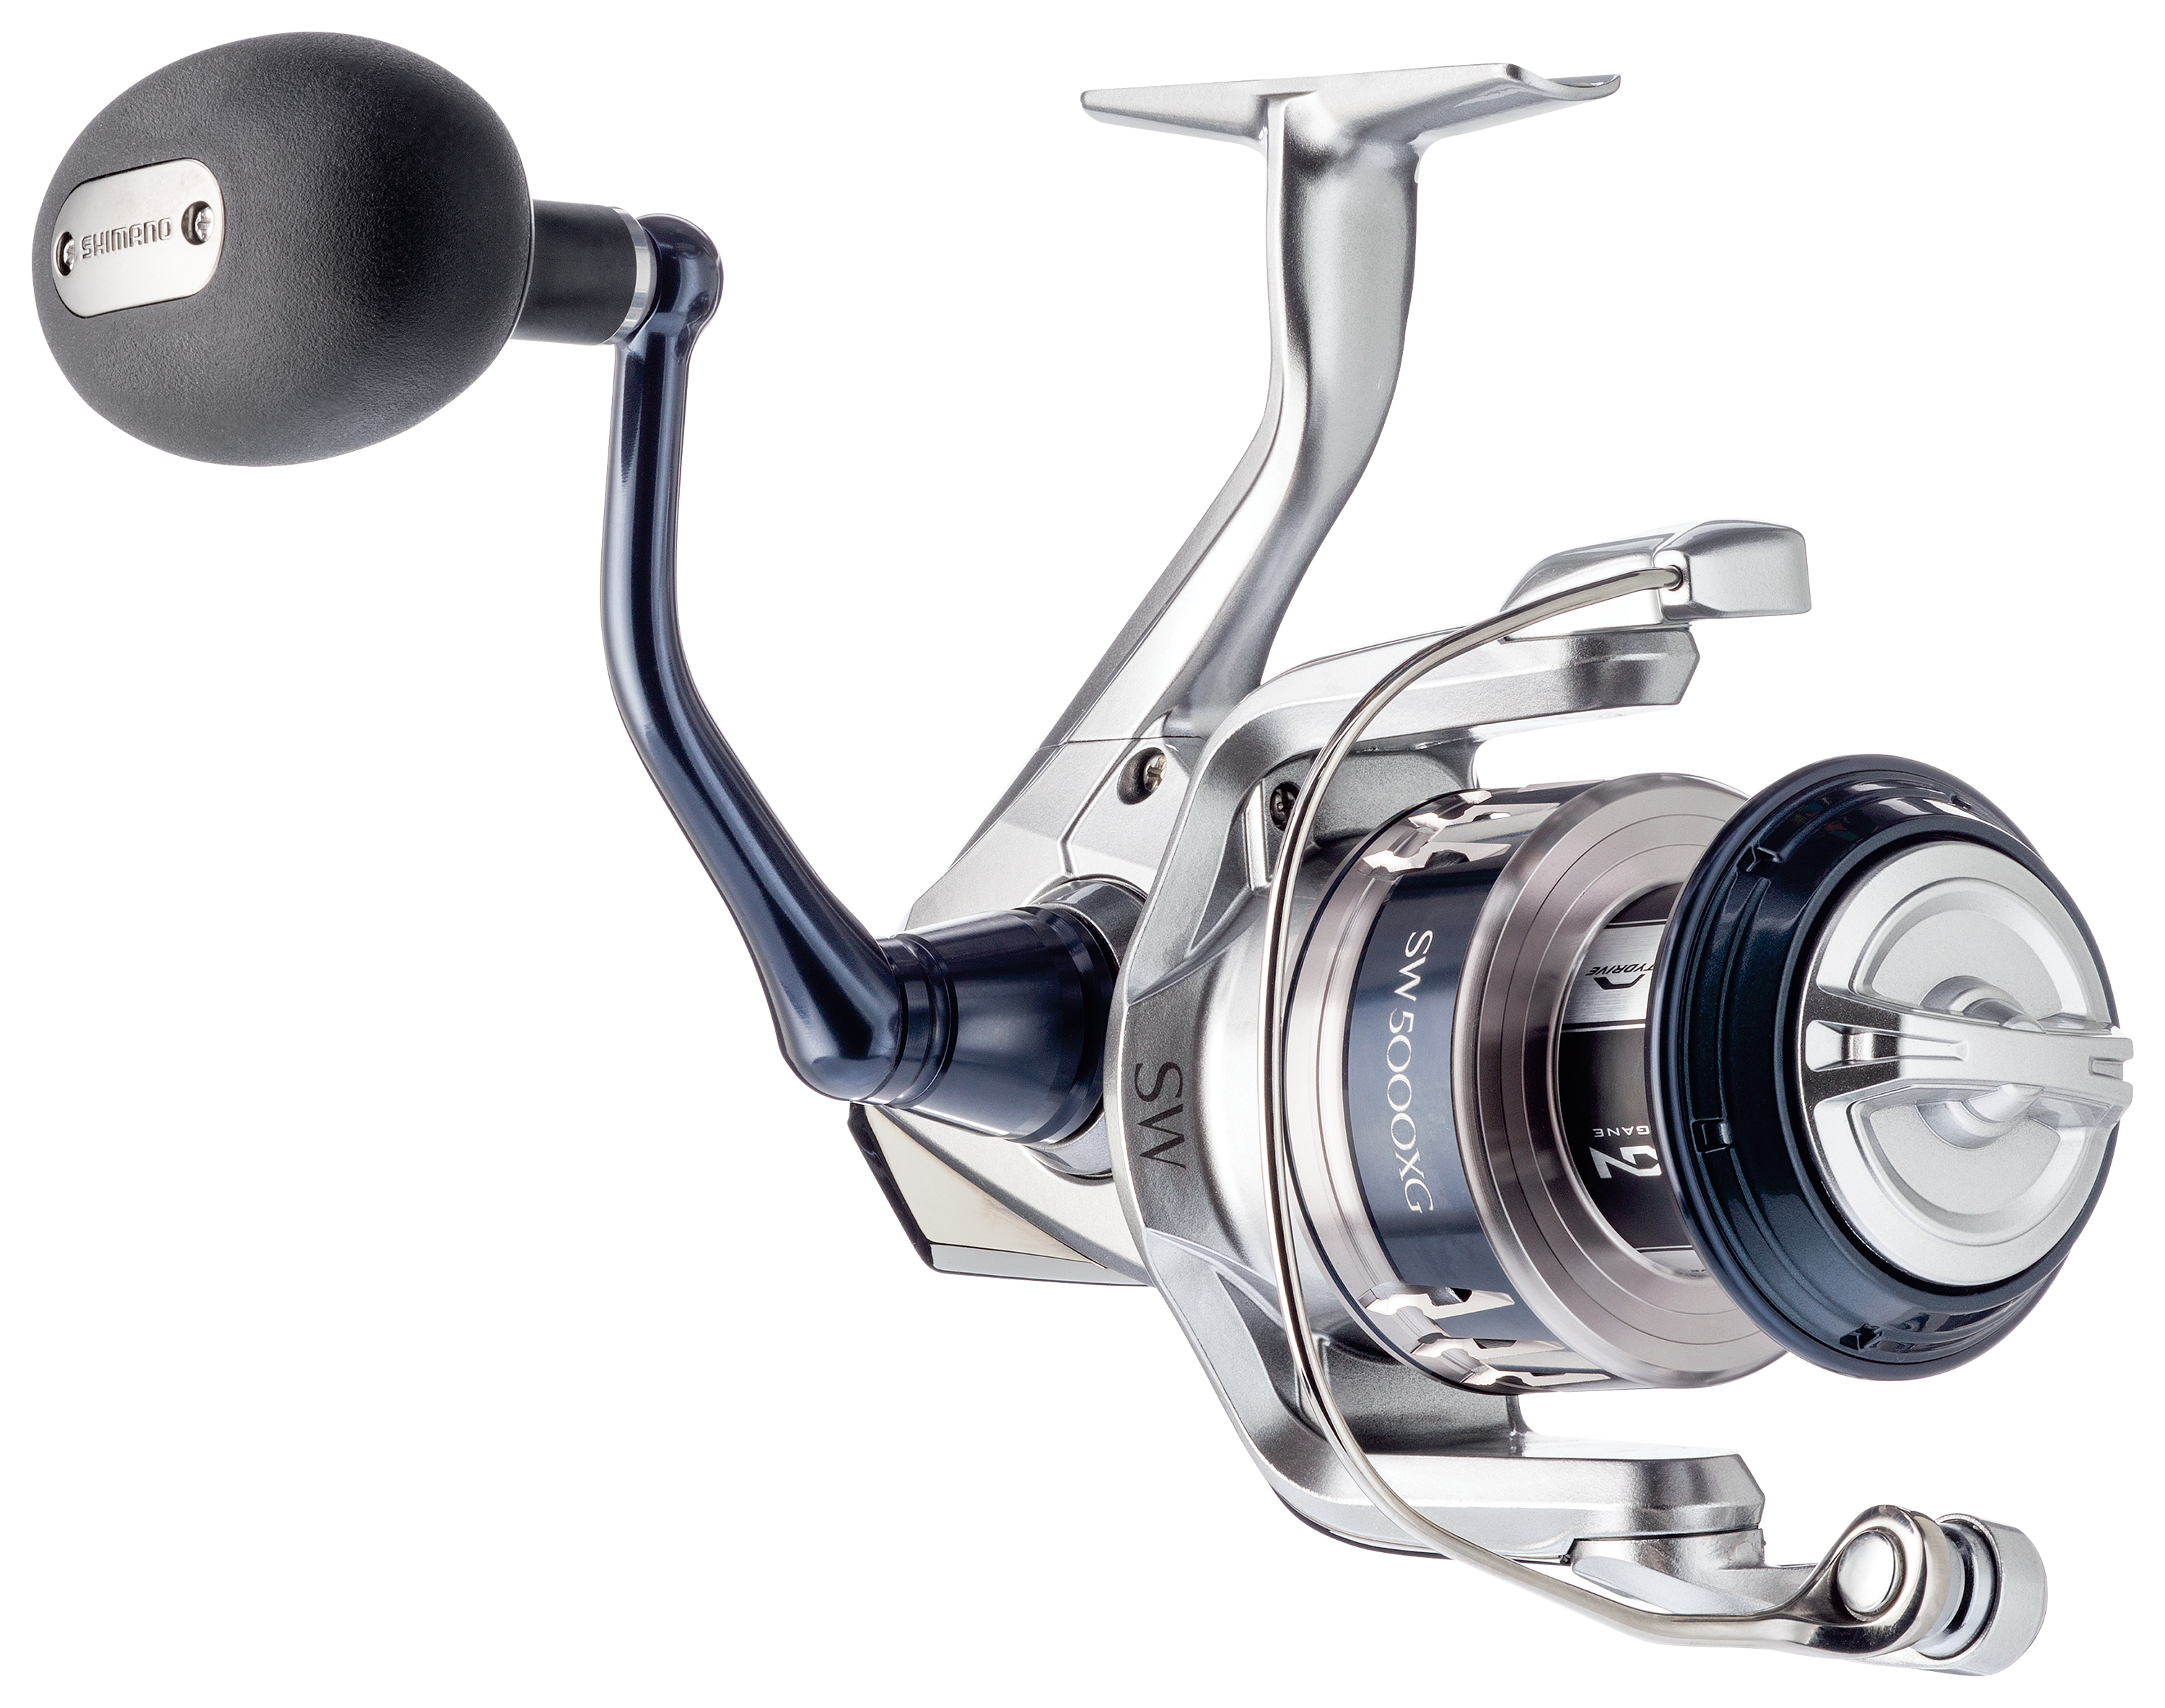 Shimano Saragosa SW Spinning Reel - Left Right - 5 7 1 - 6000 Size